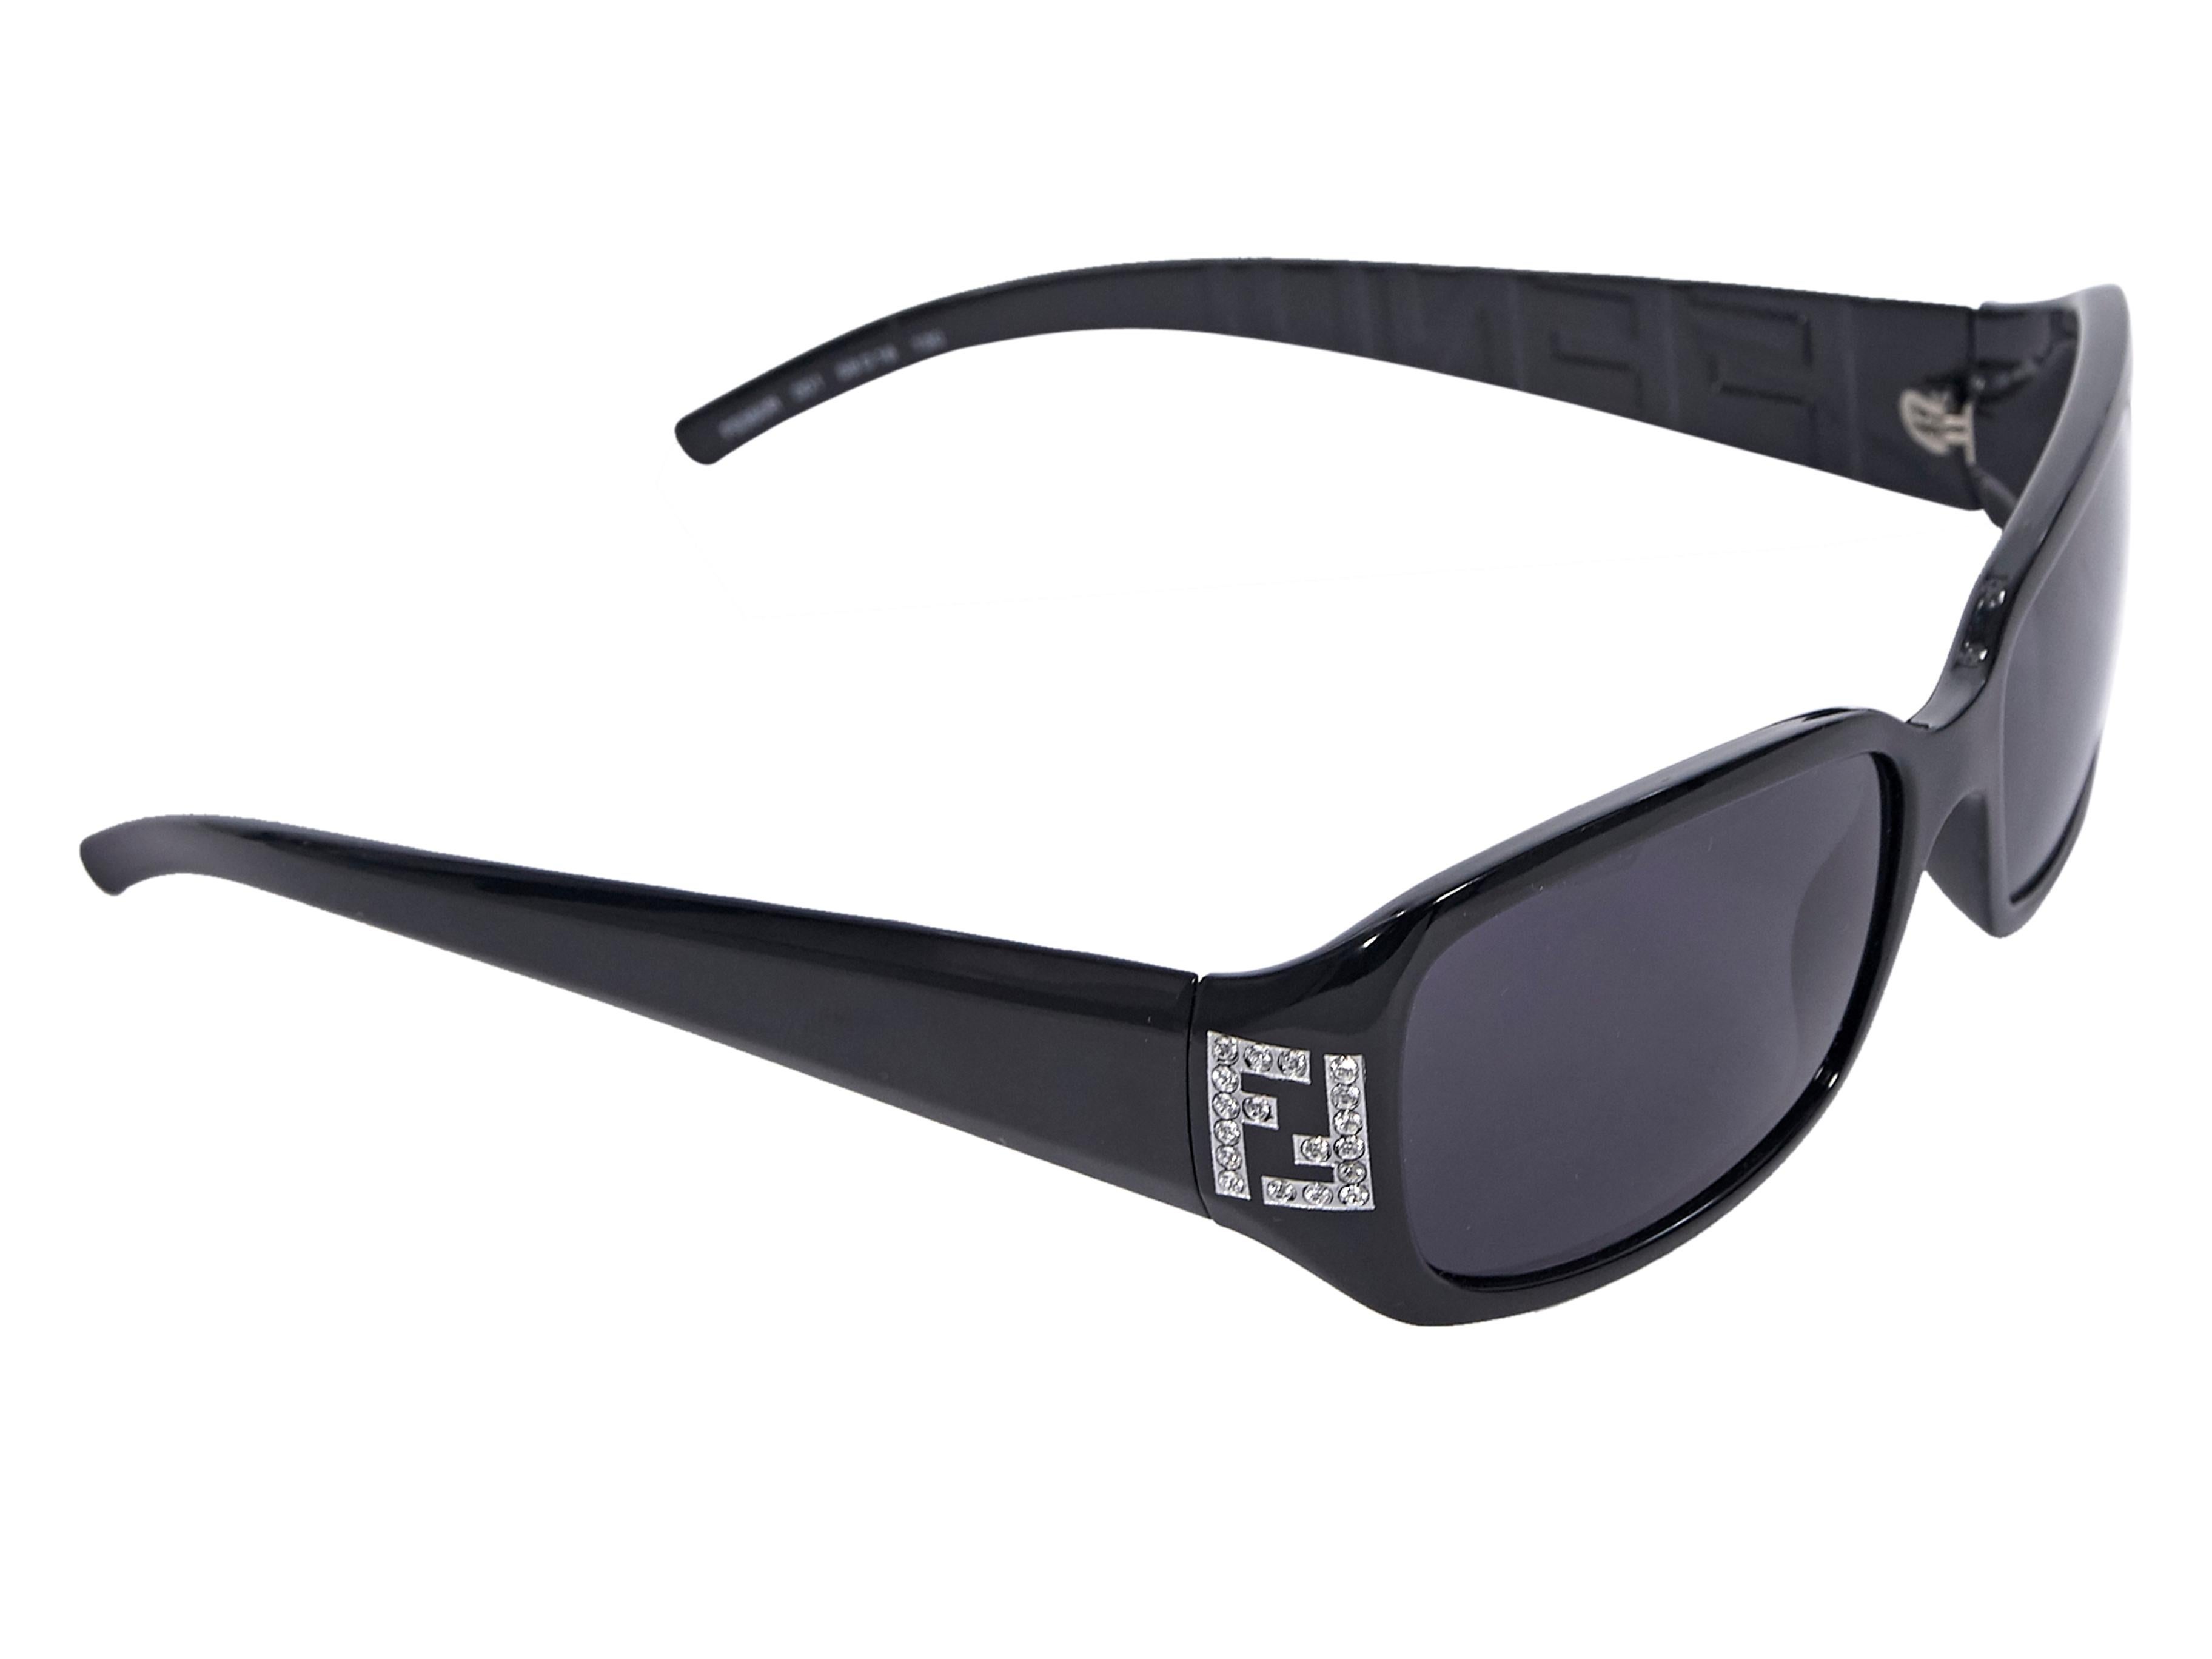 Product details:  Black rectangular sunglasses by Fendi.  Rhinestone embellished logo at temples.  Tapered stems.  2